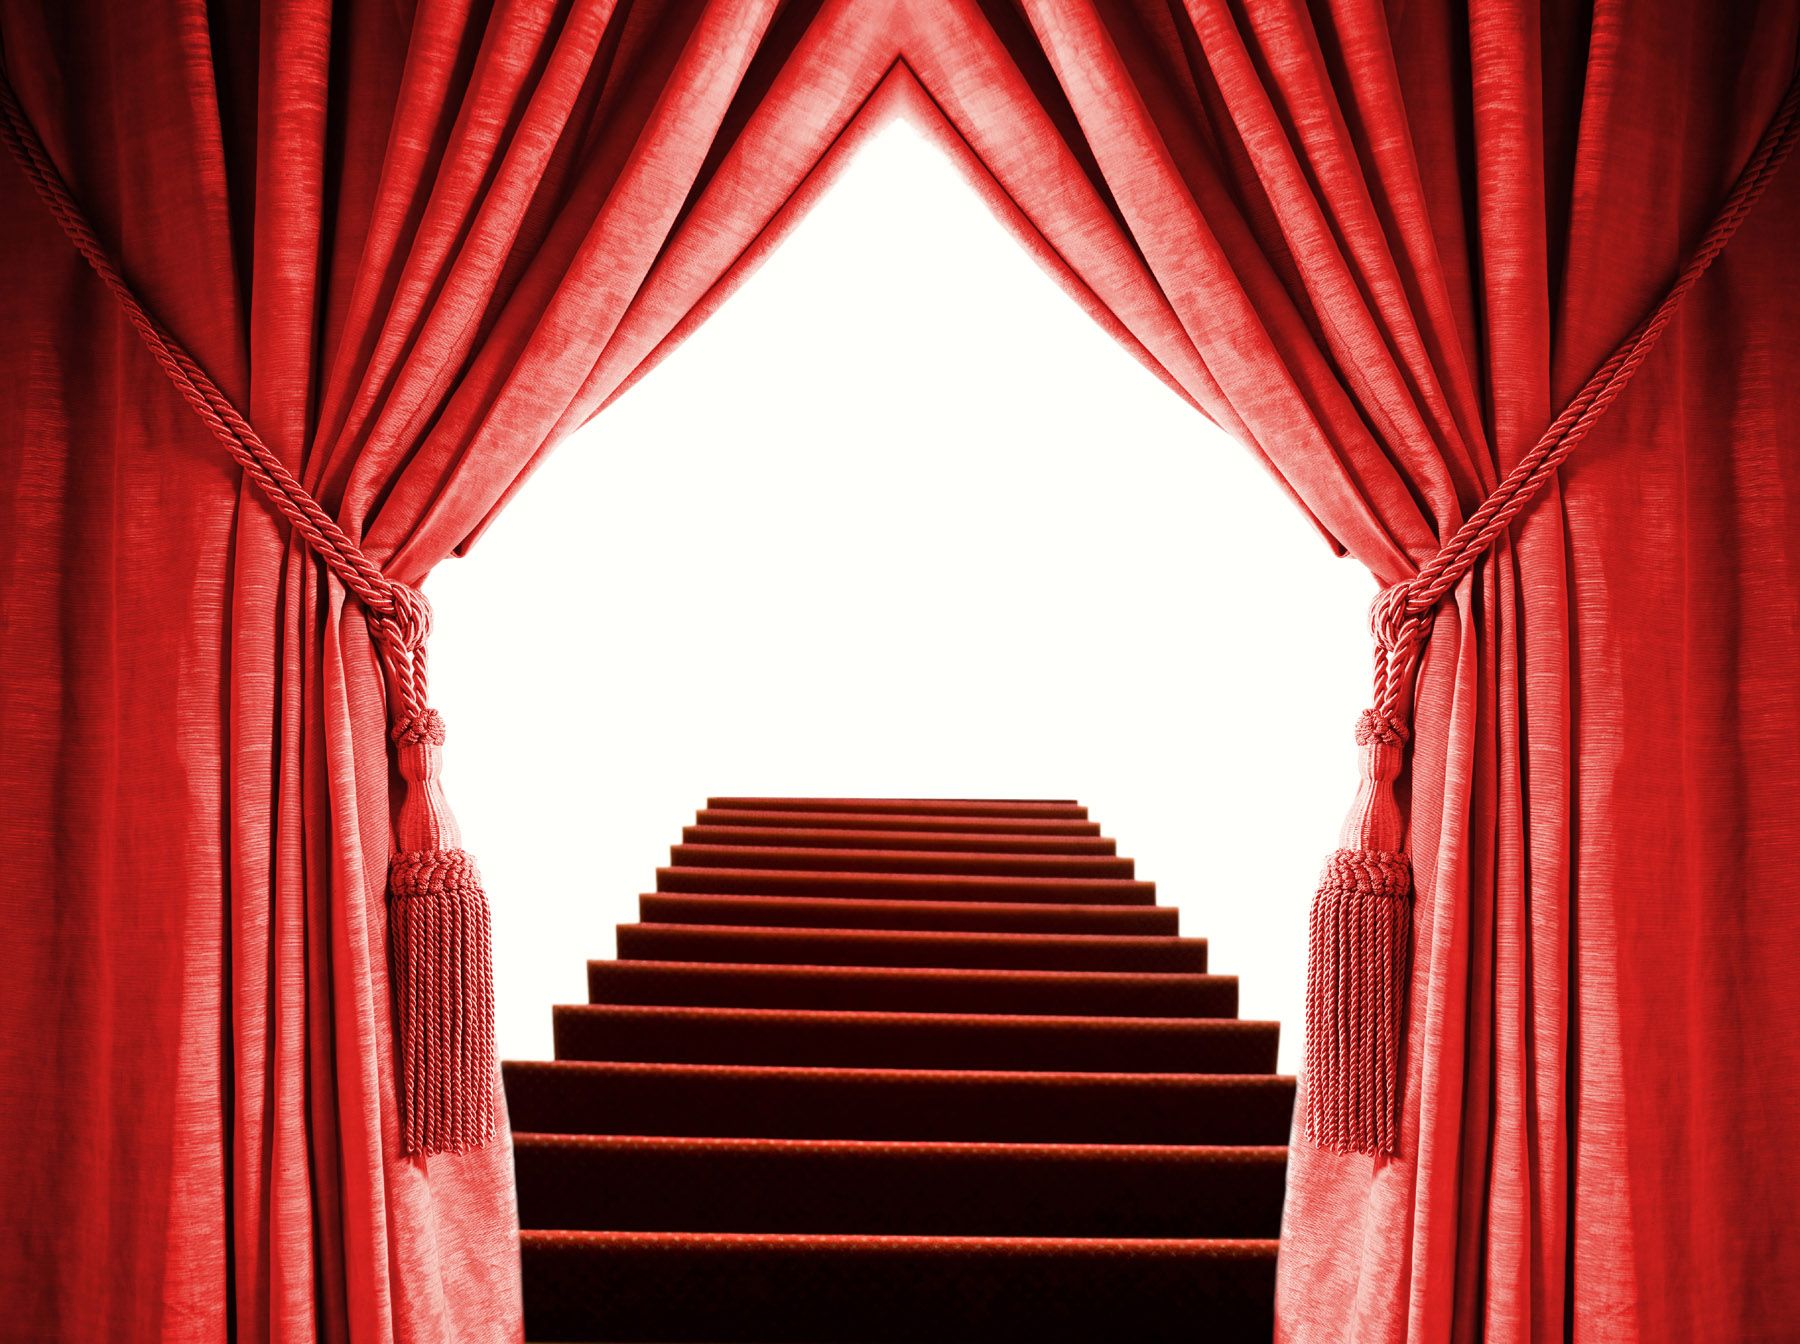 Red curtain and stair material 27578 color theme